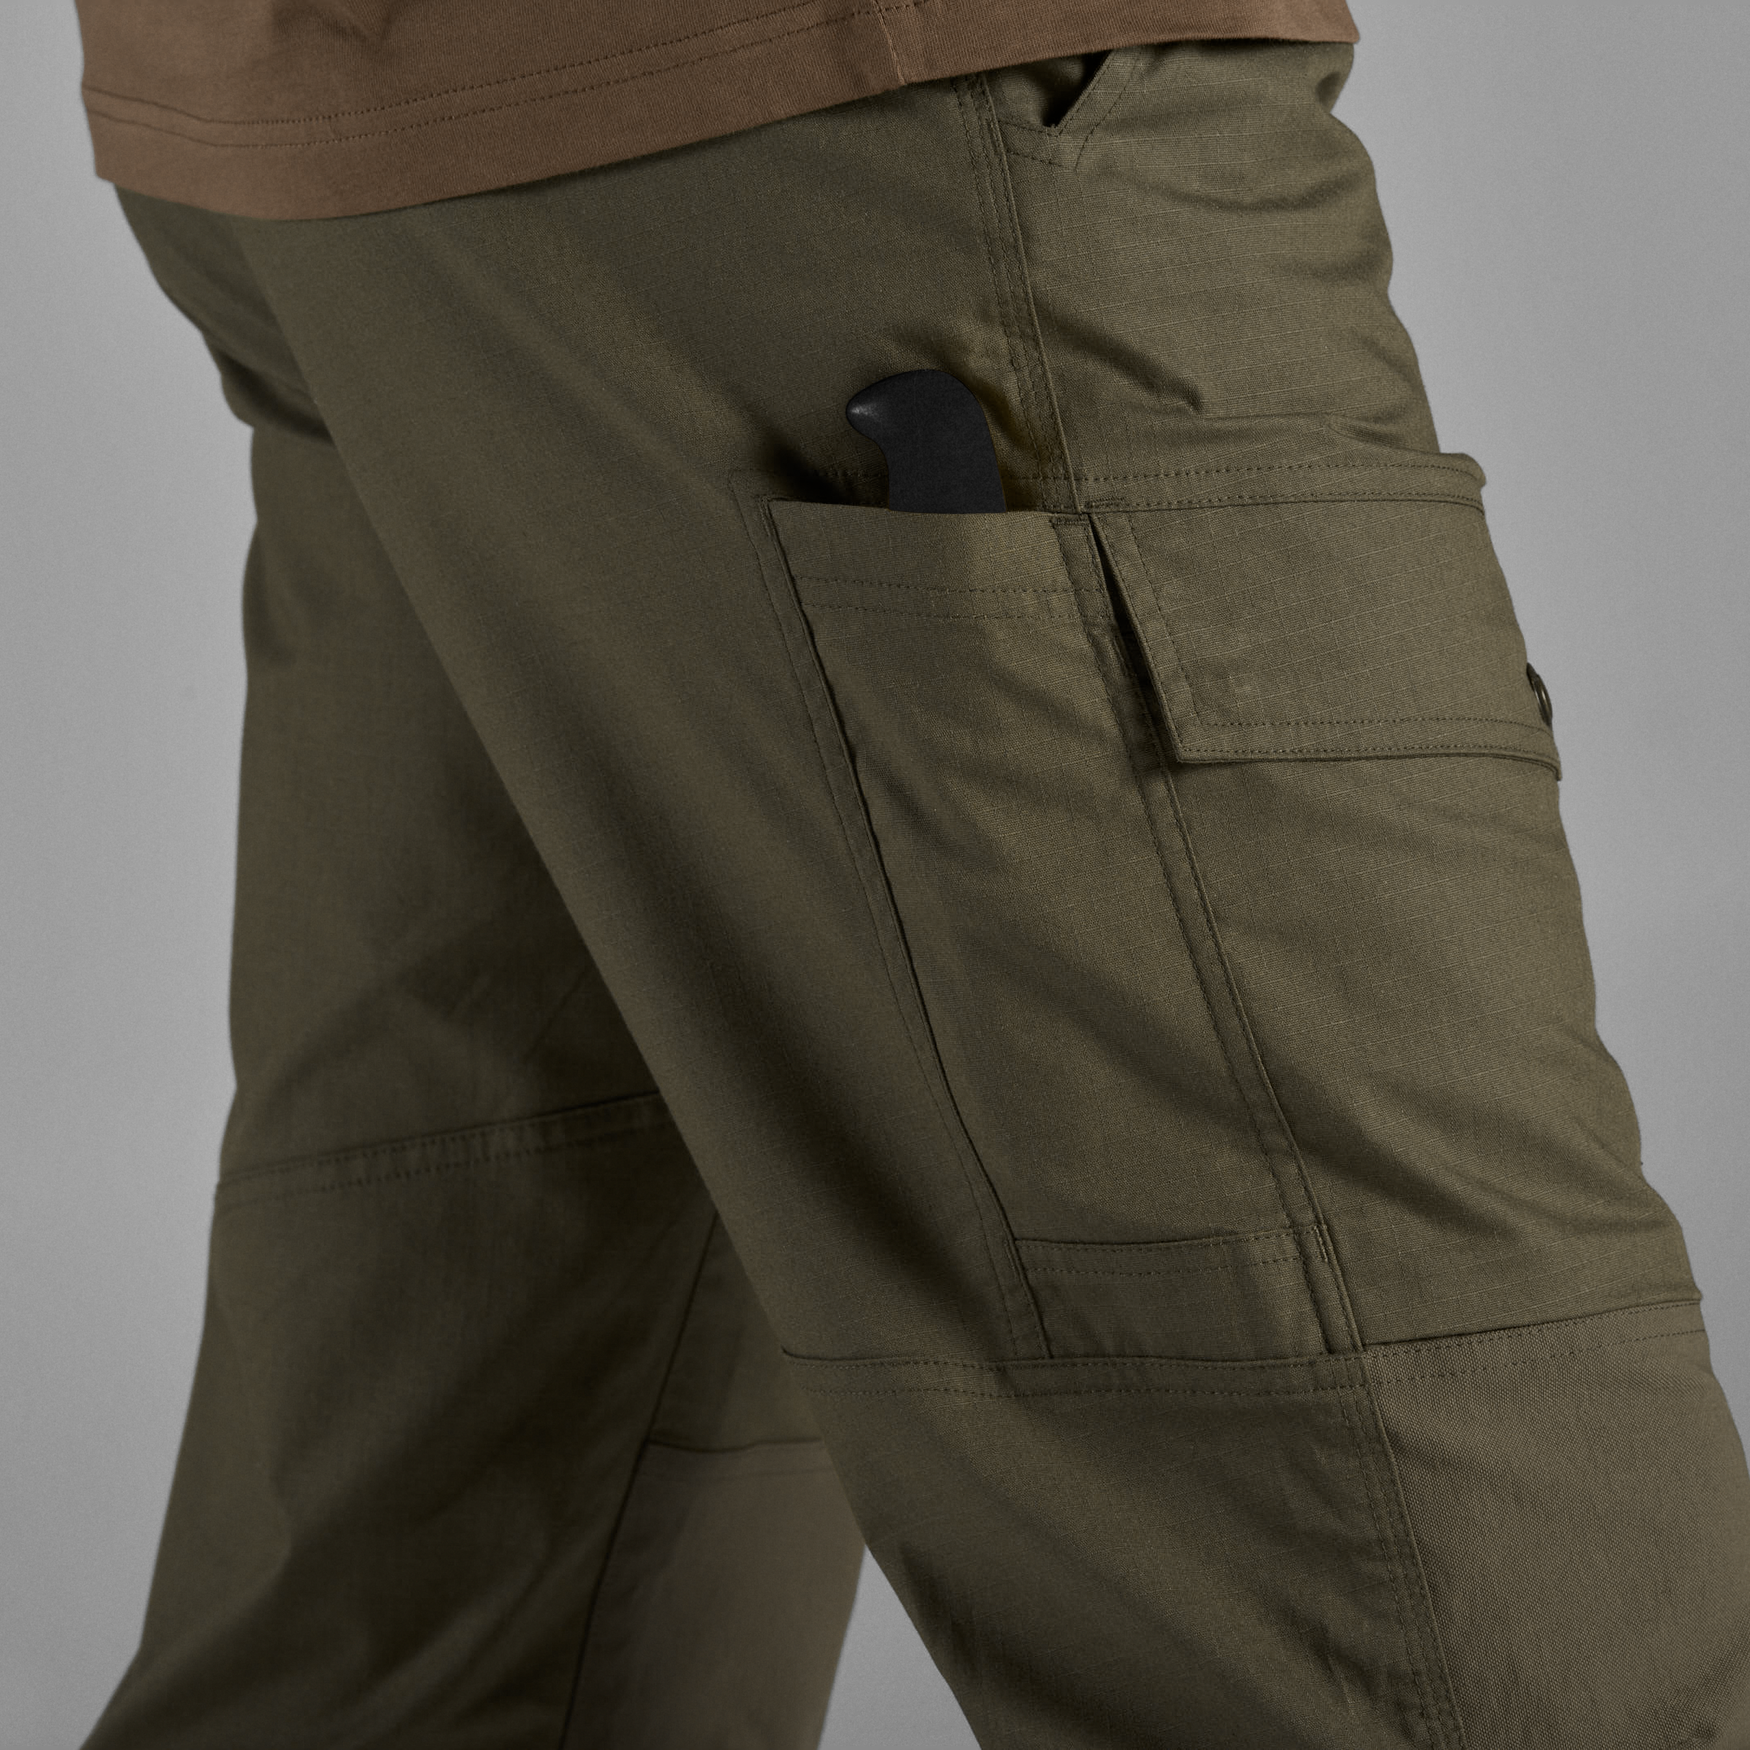 The Pro Hunter light trousers are a lightweight version of the highly popul...